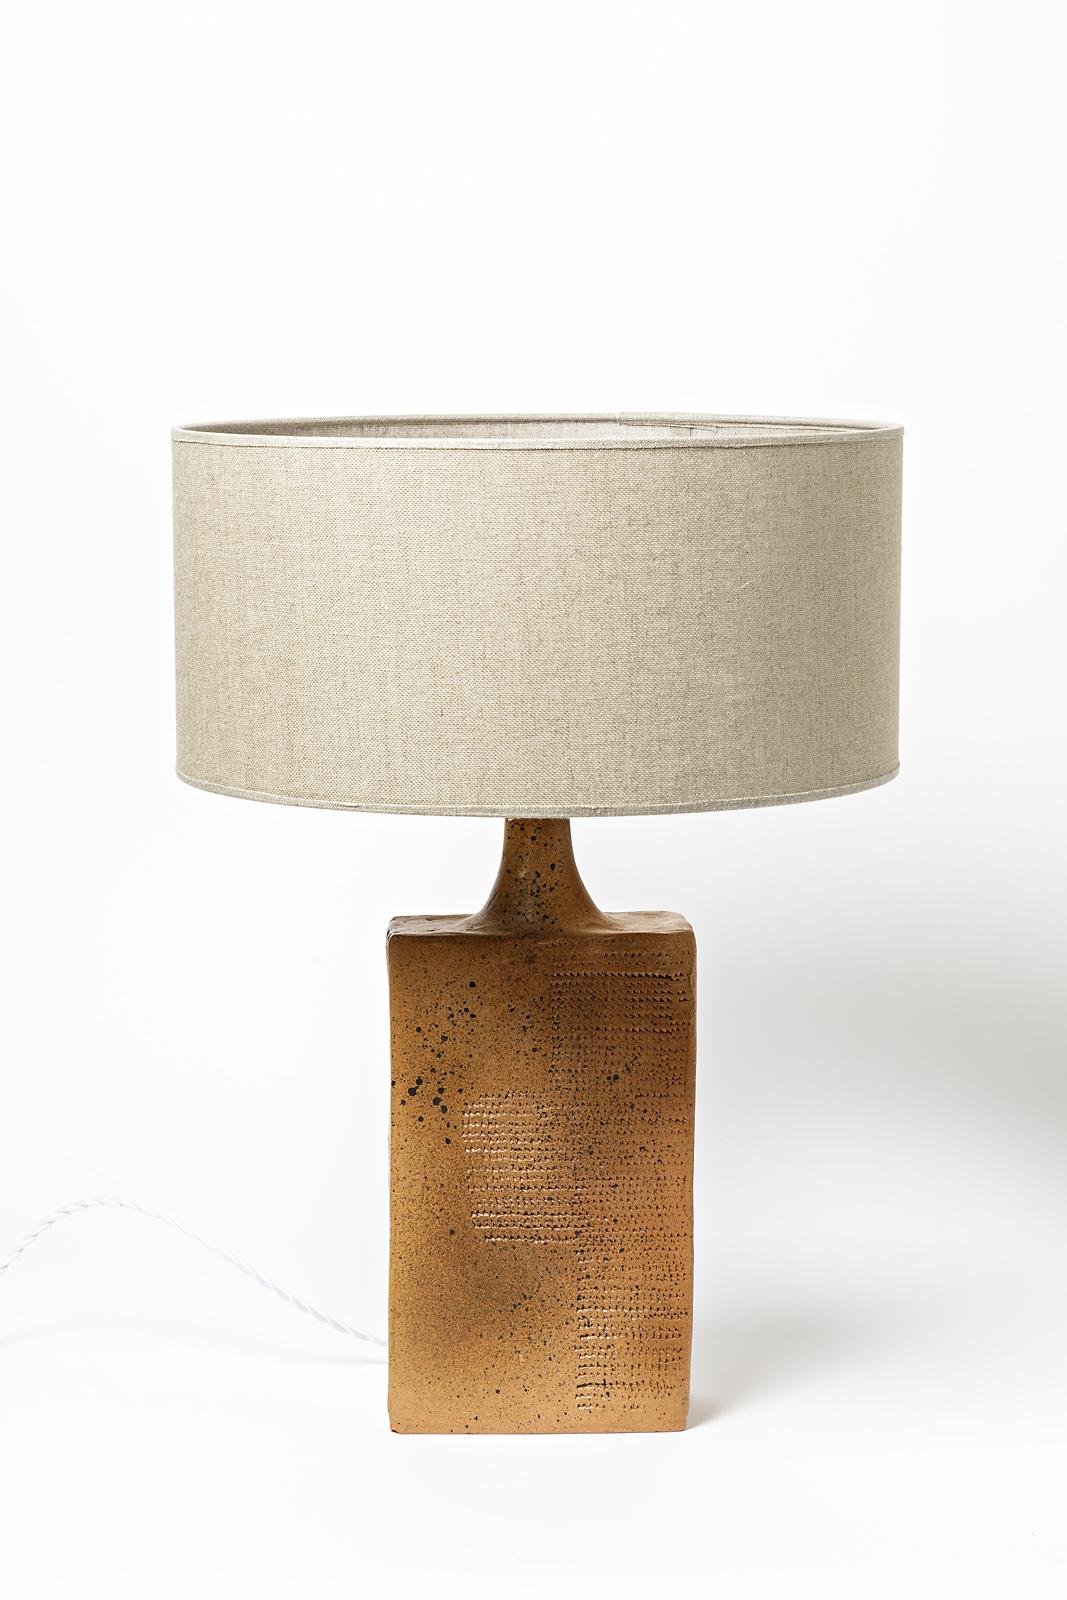 20th Century Brown and Black Ceramic Table Lamp French Handmade Production Onet, circa 1950 For Sale